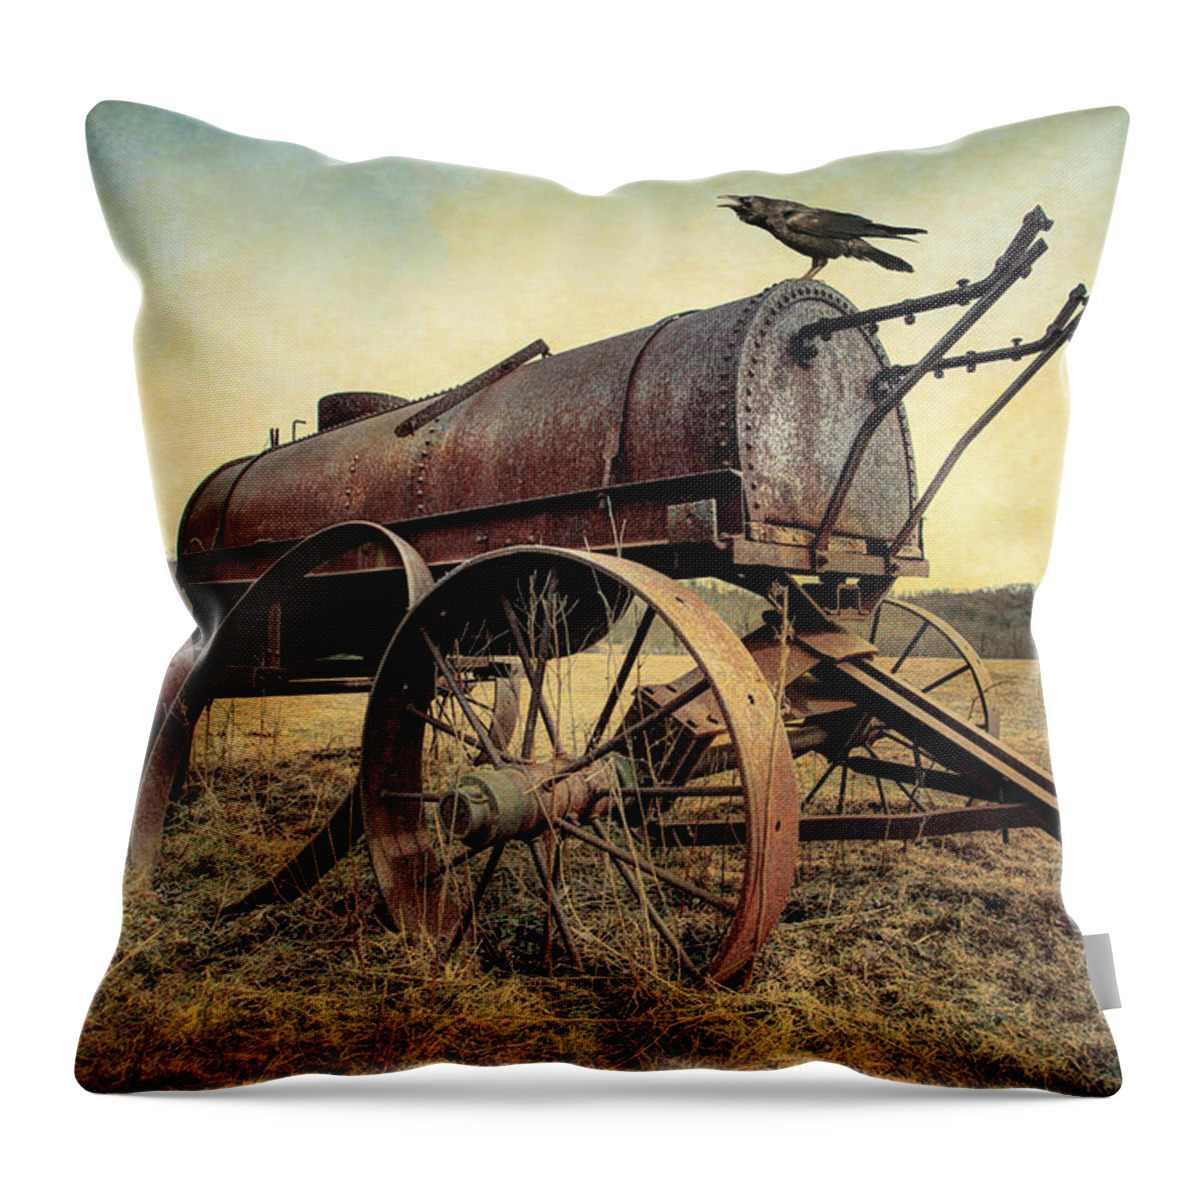 Water Wagon Throw Pillow featuring the photograph On the Water Wagon - Agricultural Relic by Gary Heller